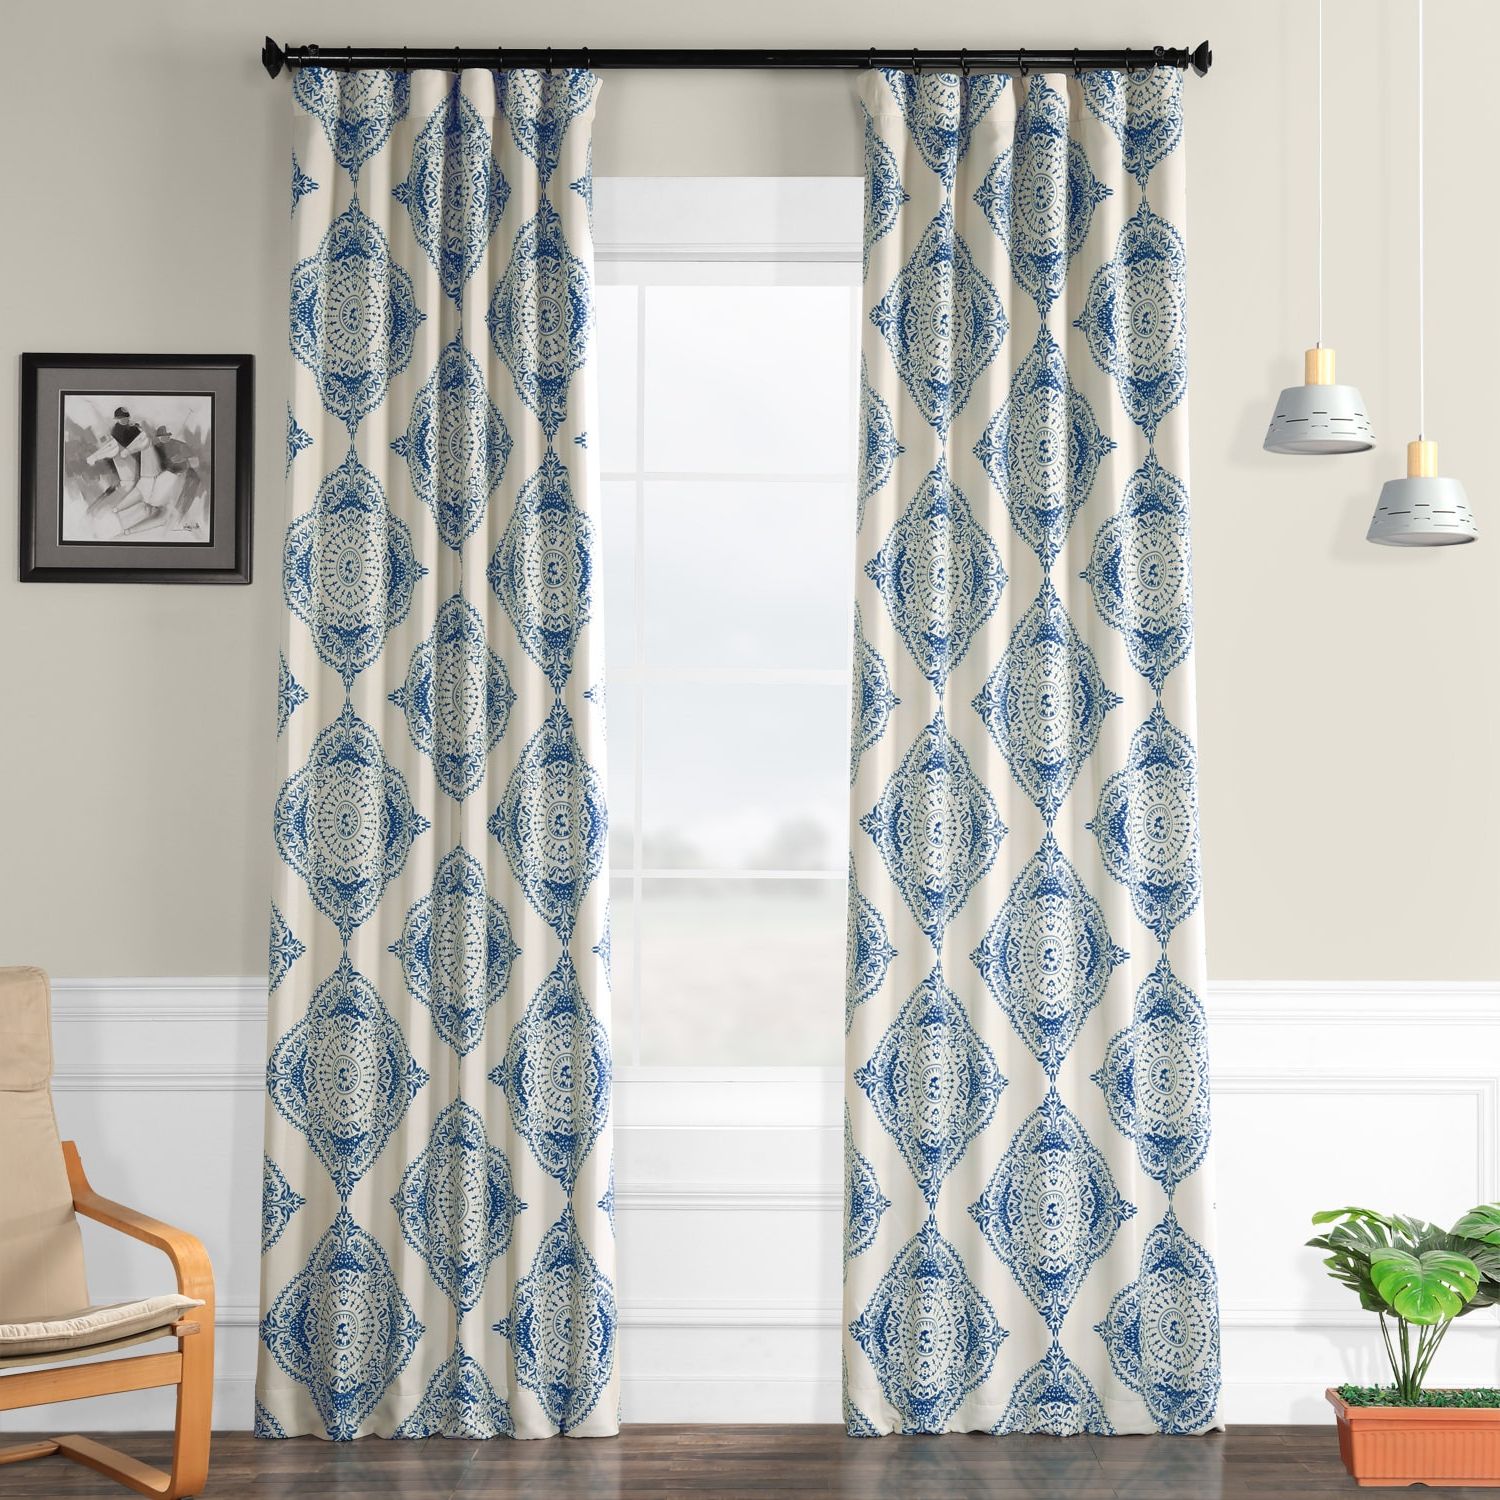 2020 Henna Blue Blackout Curtain With Solid Cotton True Blackout Curtain Panels (View 19 of 20)